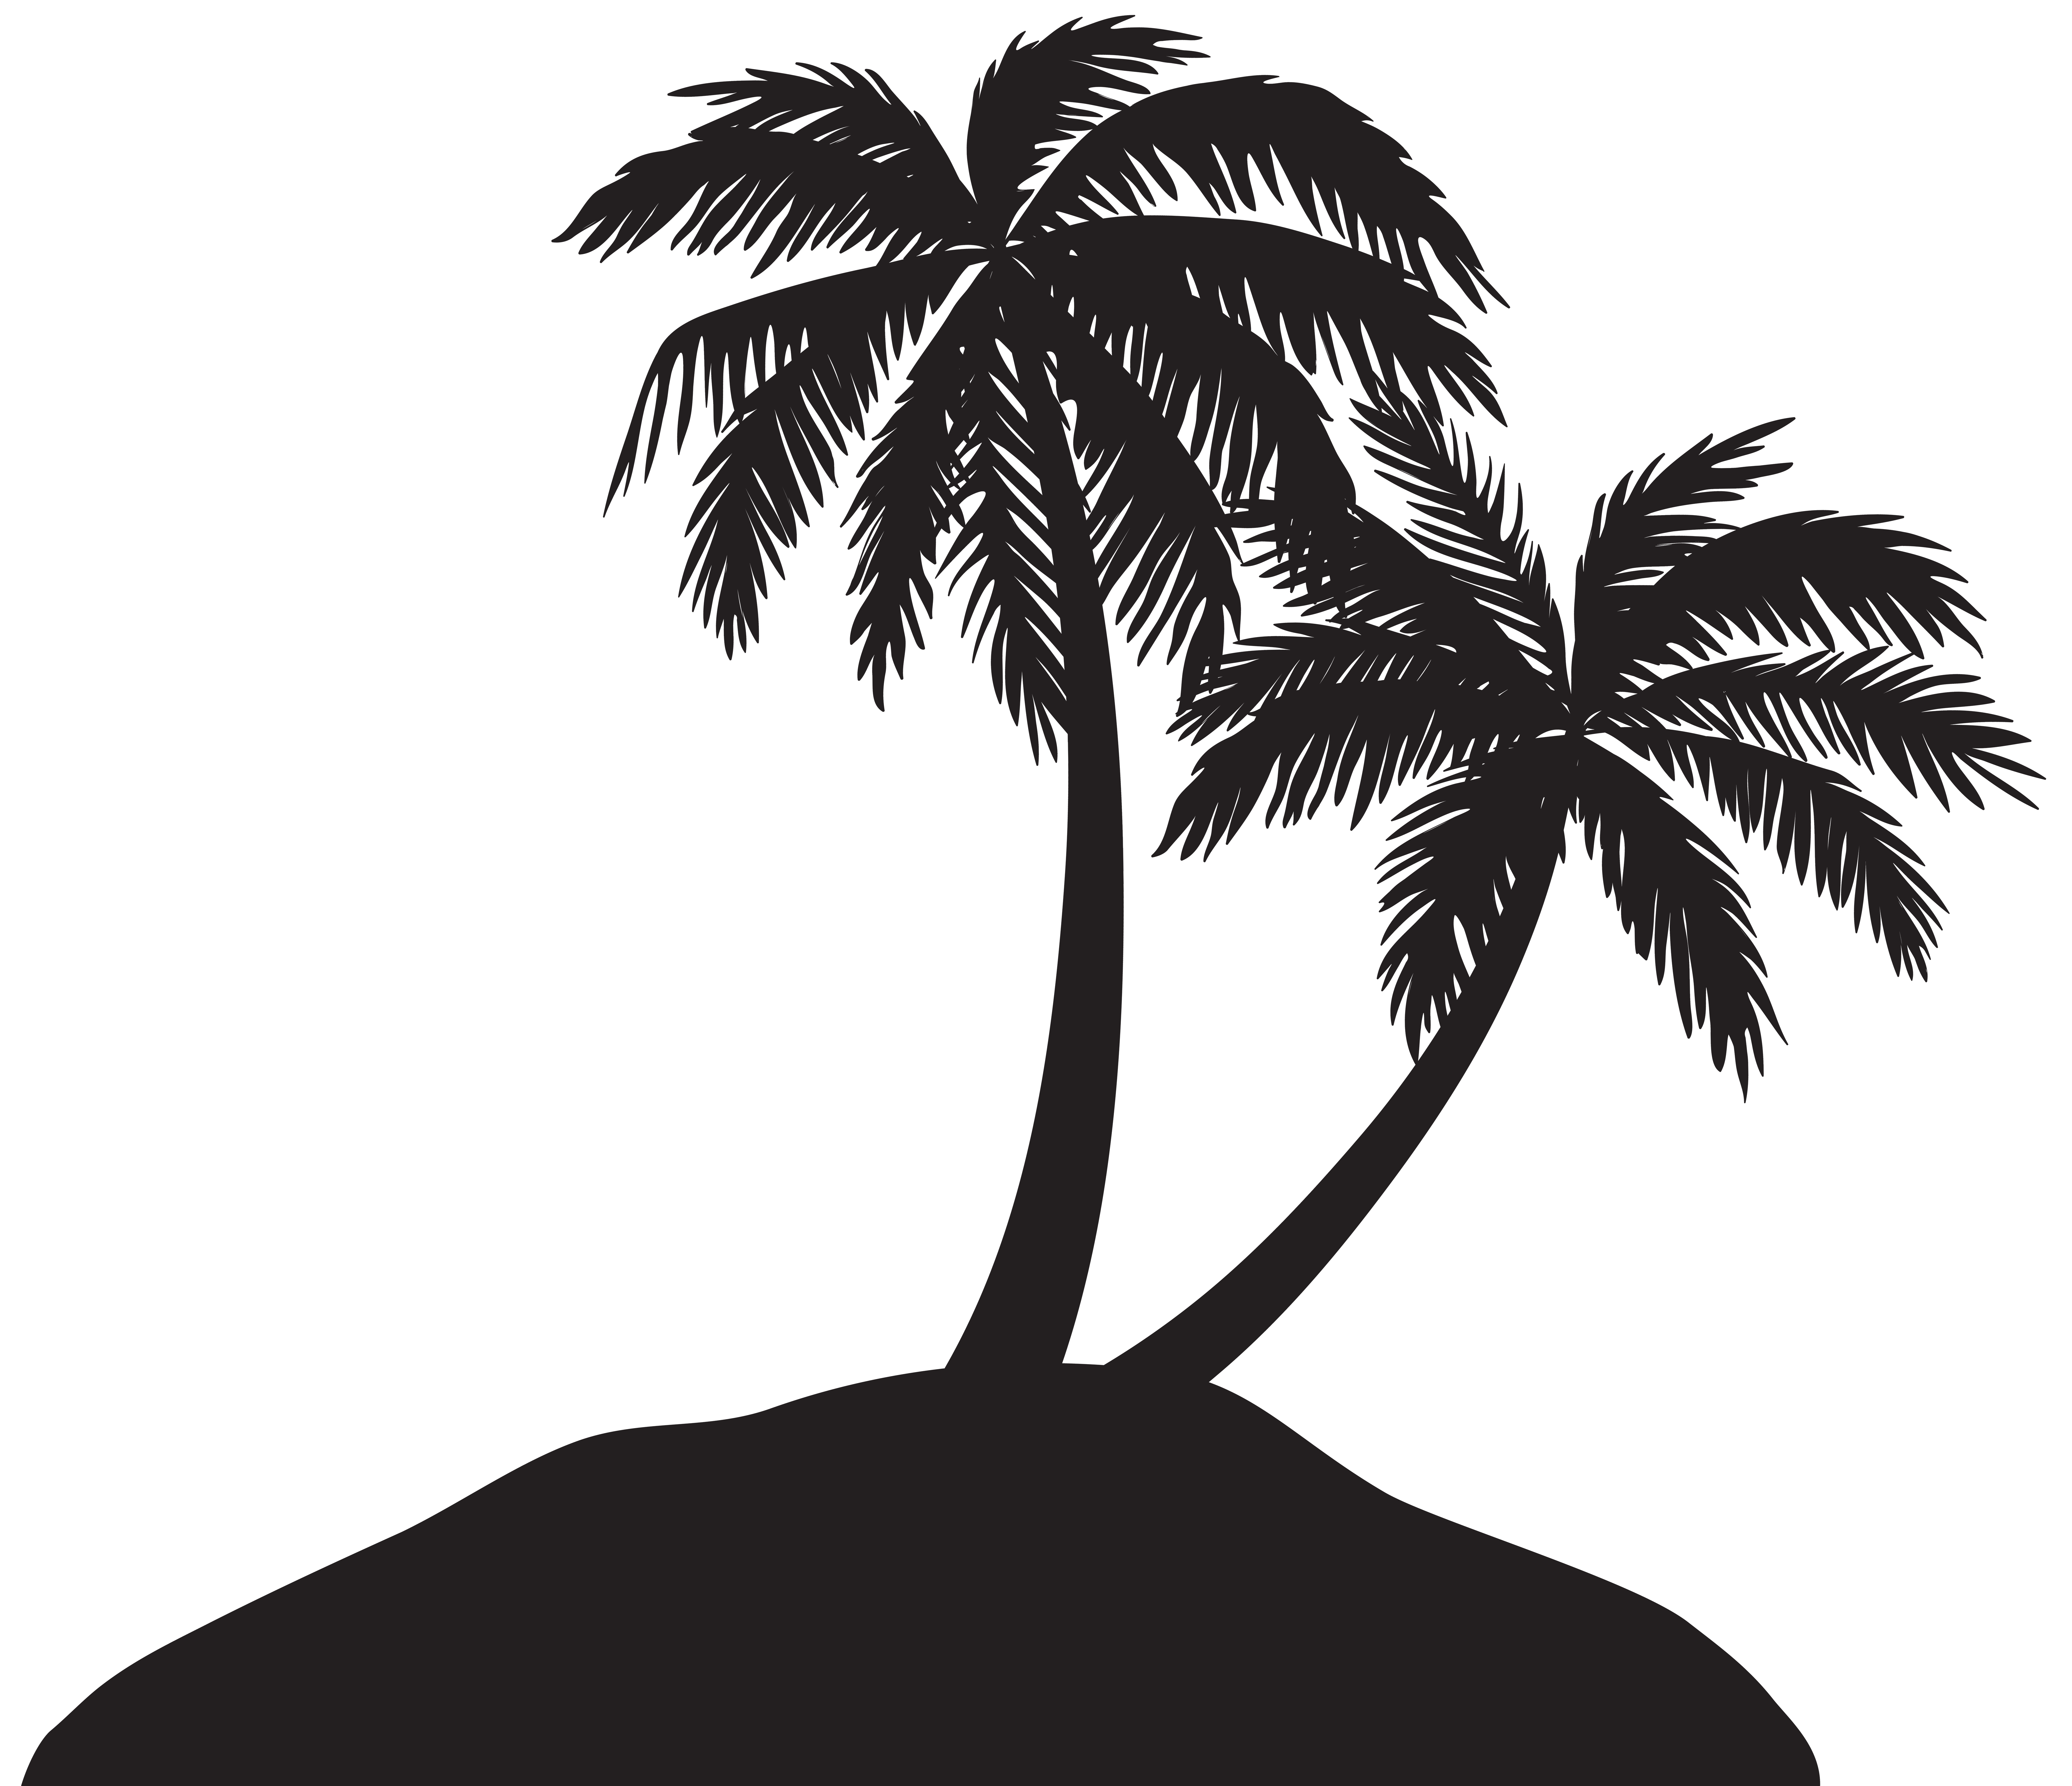 Planeten clipart silhouette. Island with palm trees